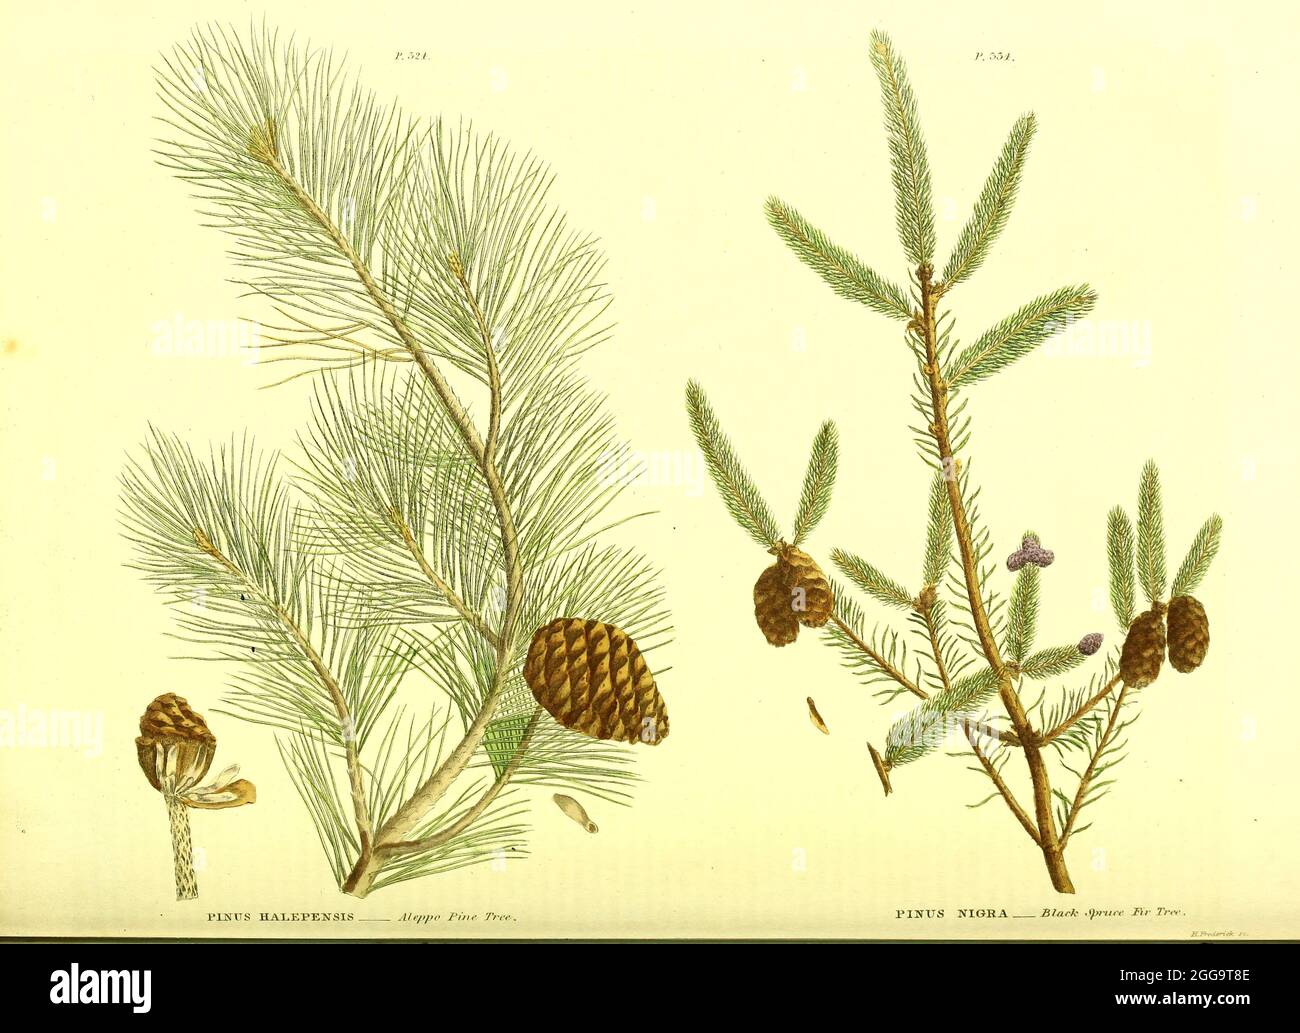 Pinus halepensis [Aleppo Pine Tree] and Pinus Nigra [Black Spruce Fir Tree] from Vol II of the book The universal herbal : or botanical, medical and agricultural dictionary : containing an account of all known plants in the world, arranged according to the Linnean system. Specifying the uses to which they are or may be applied By Thomas Green,  Published in 1816 by Nuttall, Fisher & Co. in Liverpool and Printed at the Caxton Press by H. Fisher Stock Photo